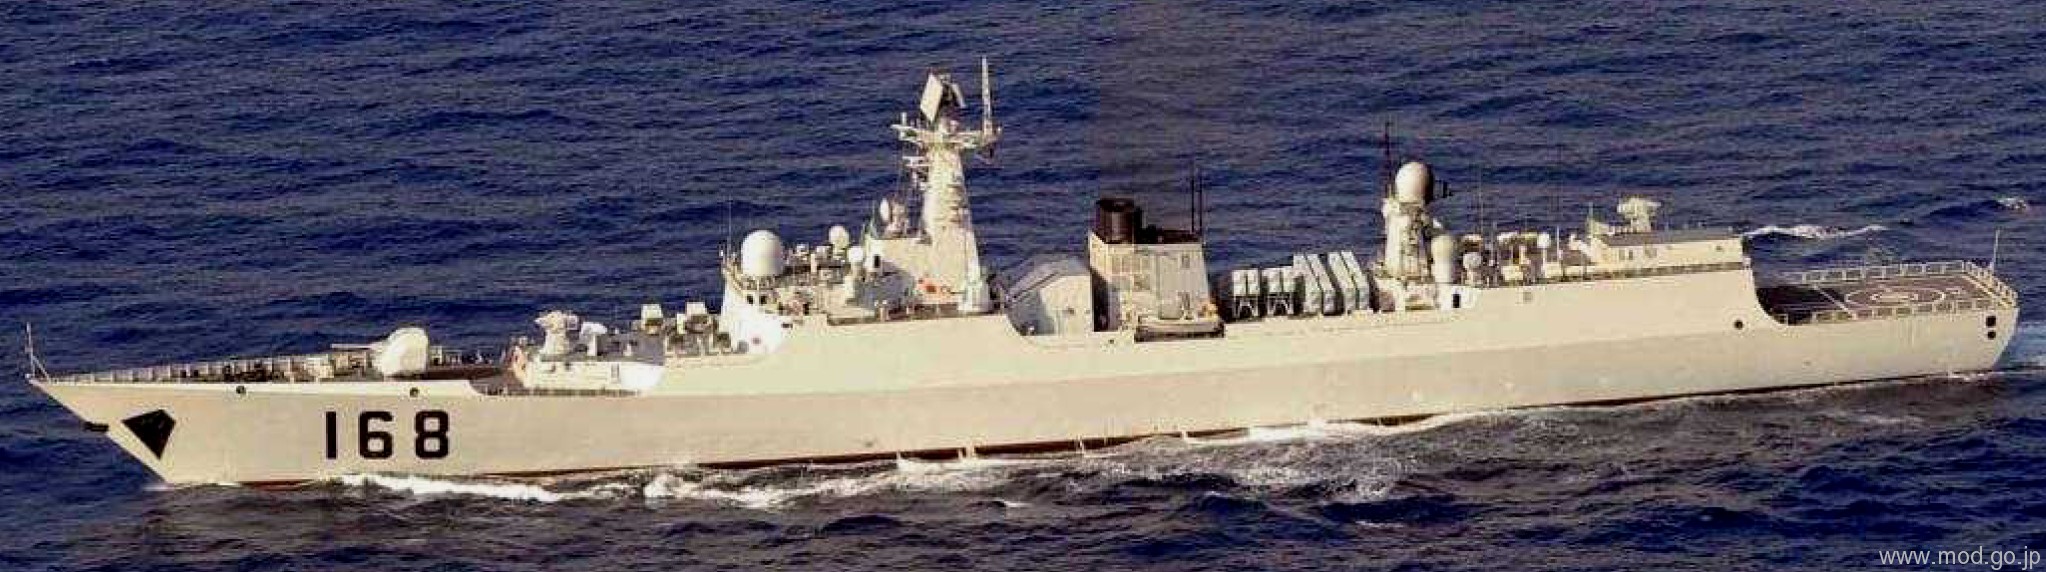 type 052b luyang-i class guided missile destroyer ddg-168 plans guangzhou china people's liberation army navy 03